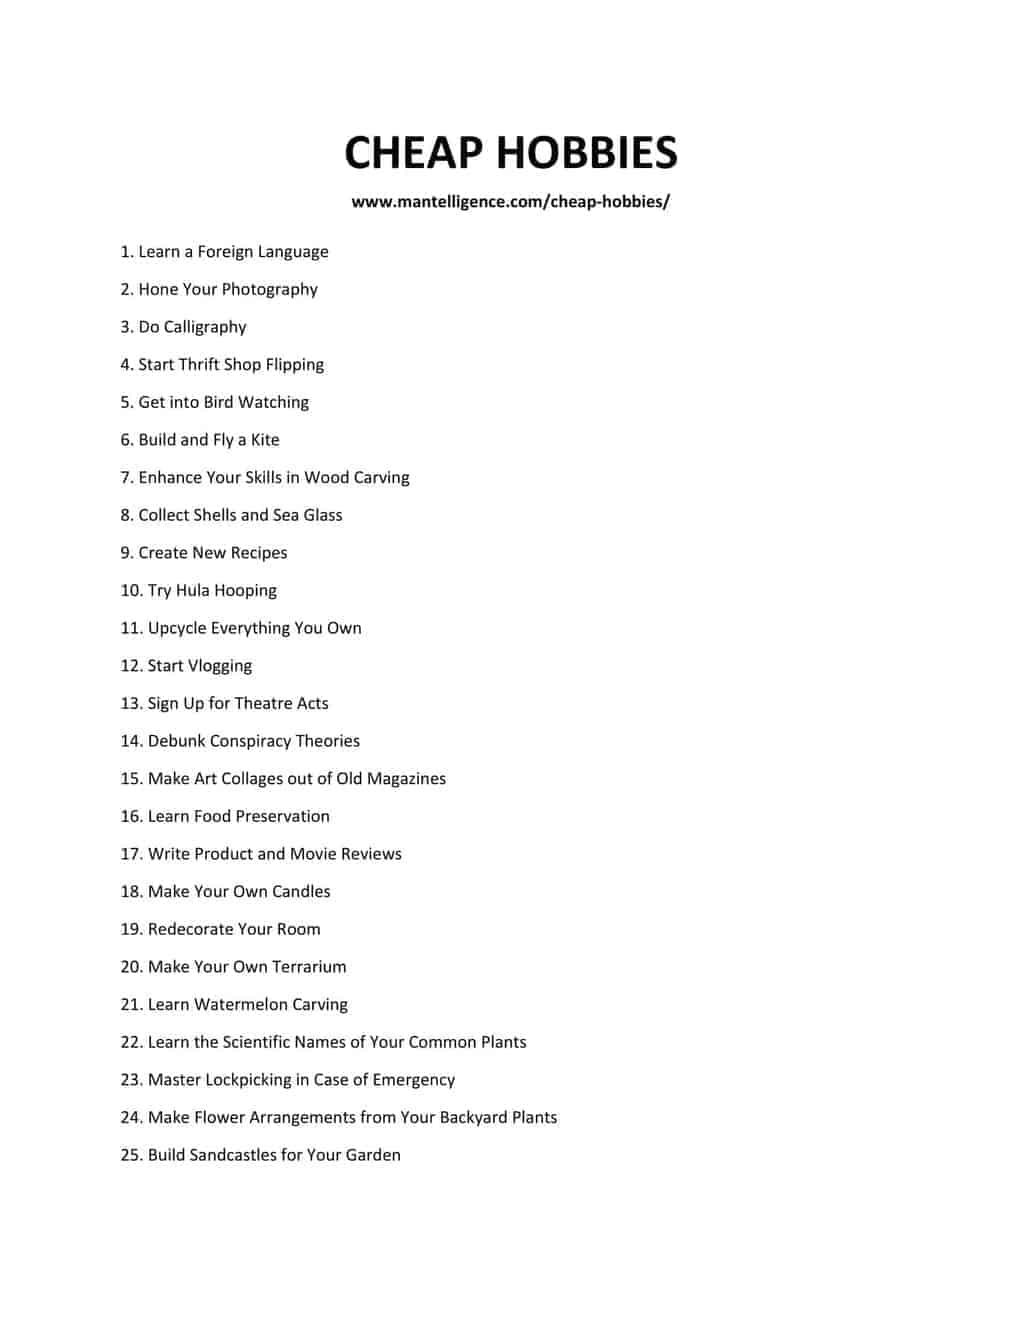 96 Cheap Hobbies - Downloadable and Printable List of Cheap Hobbies